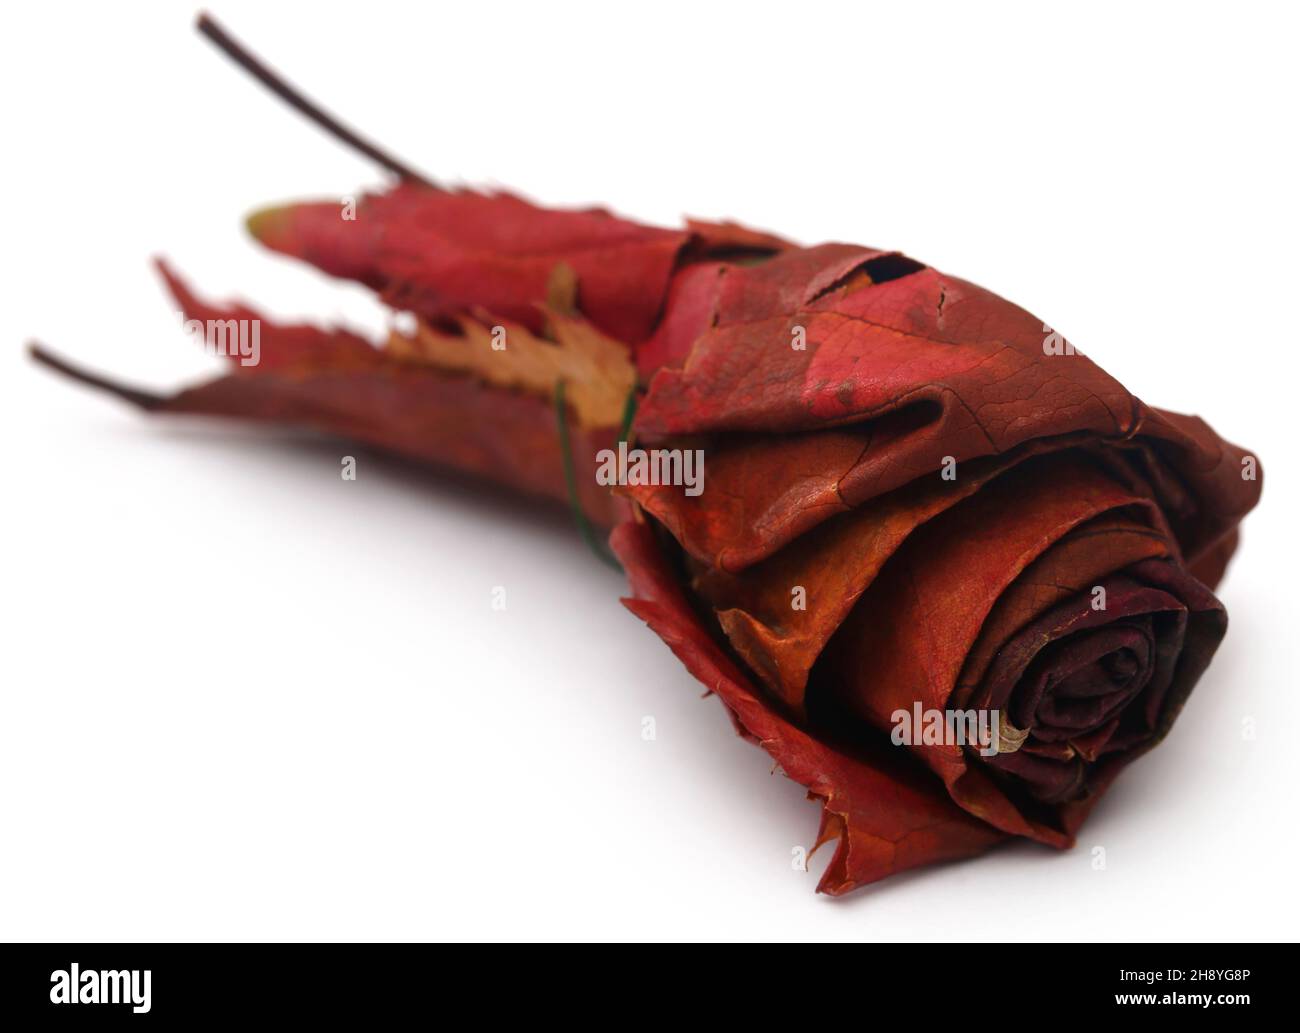 Dry rose buds as a symbol of Christmas Stock Photo